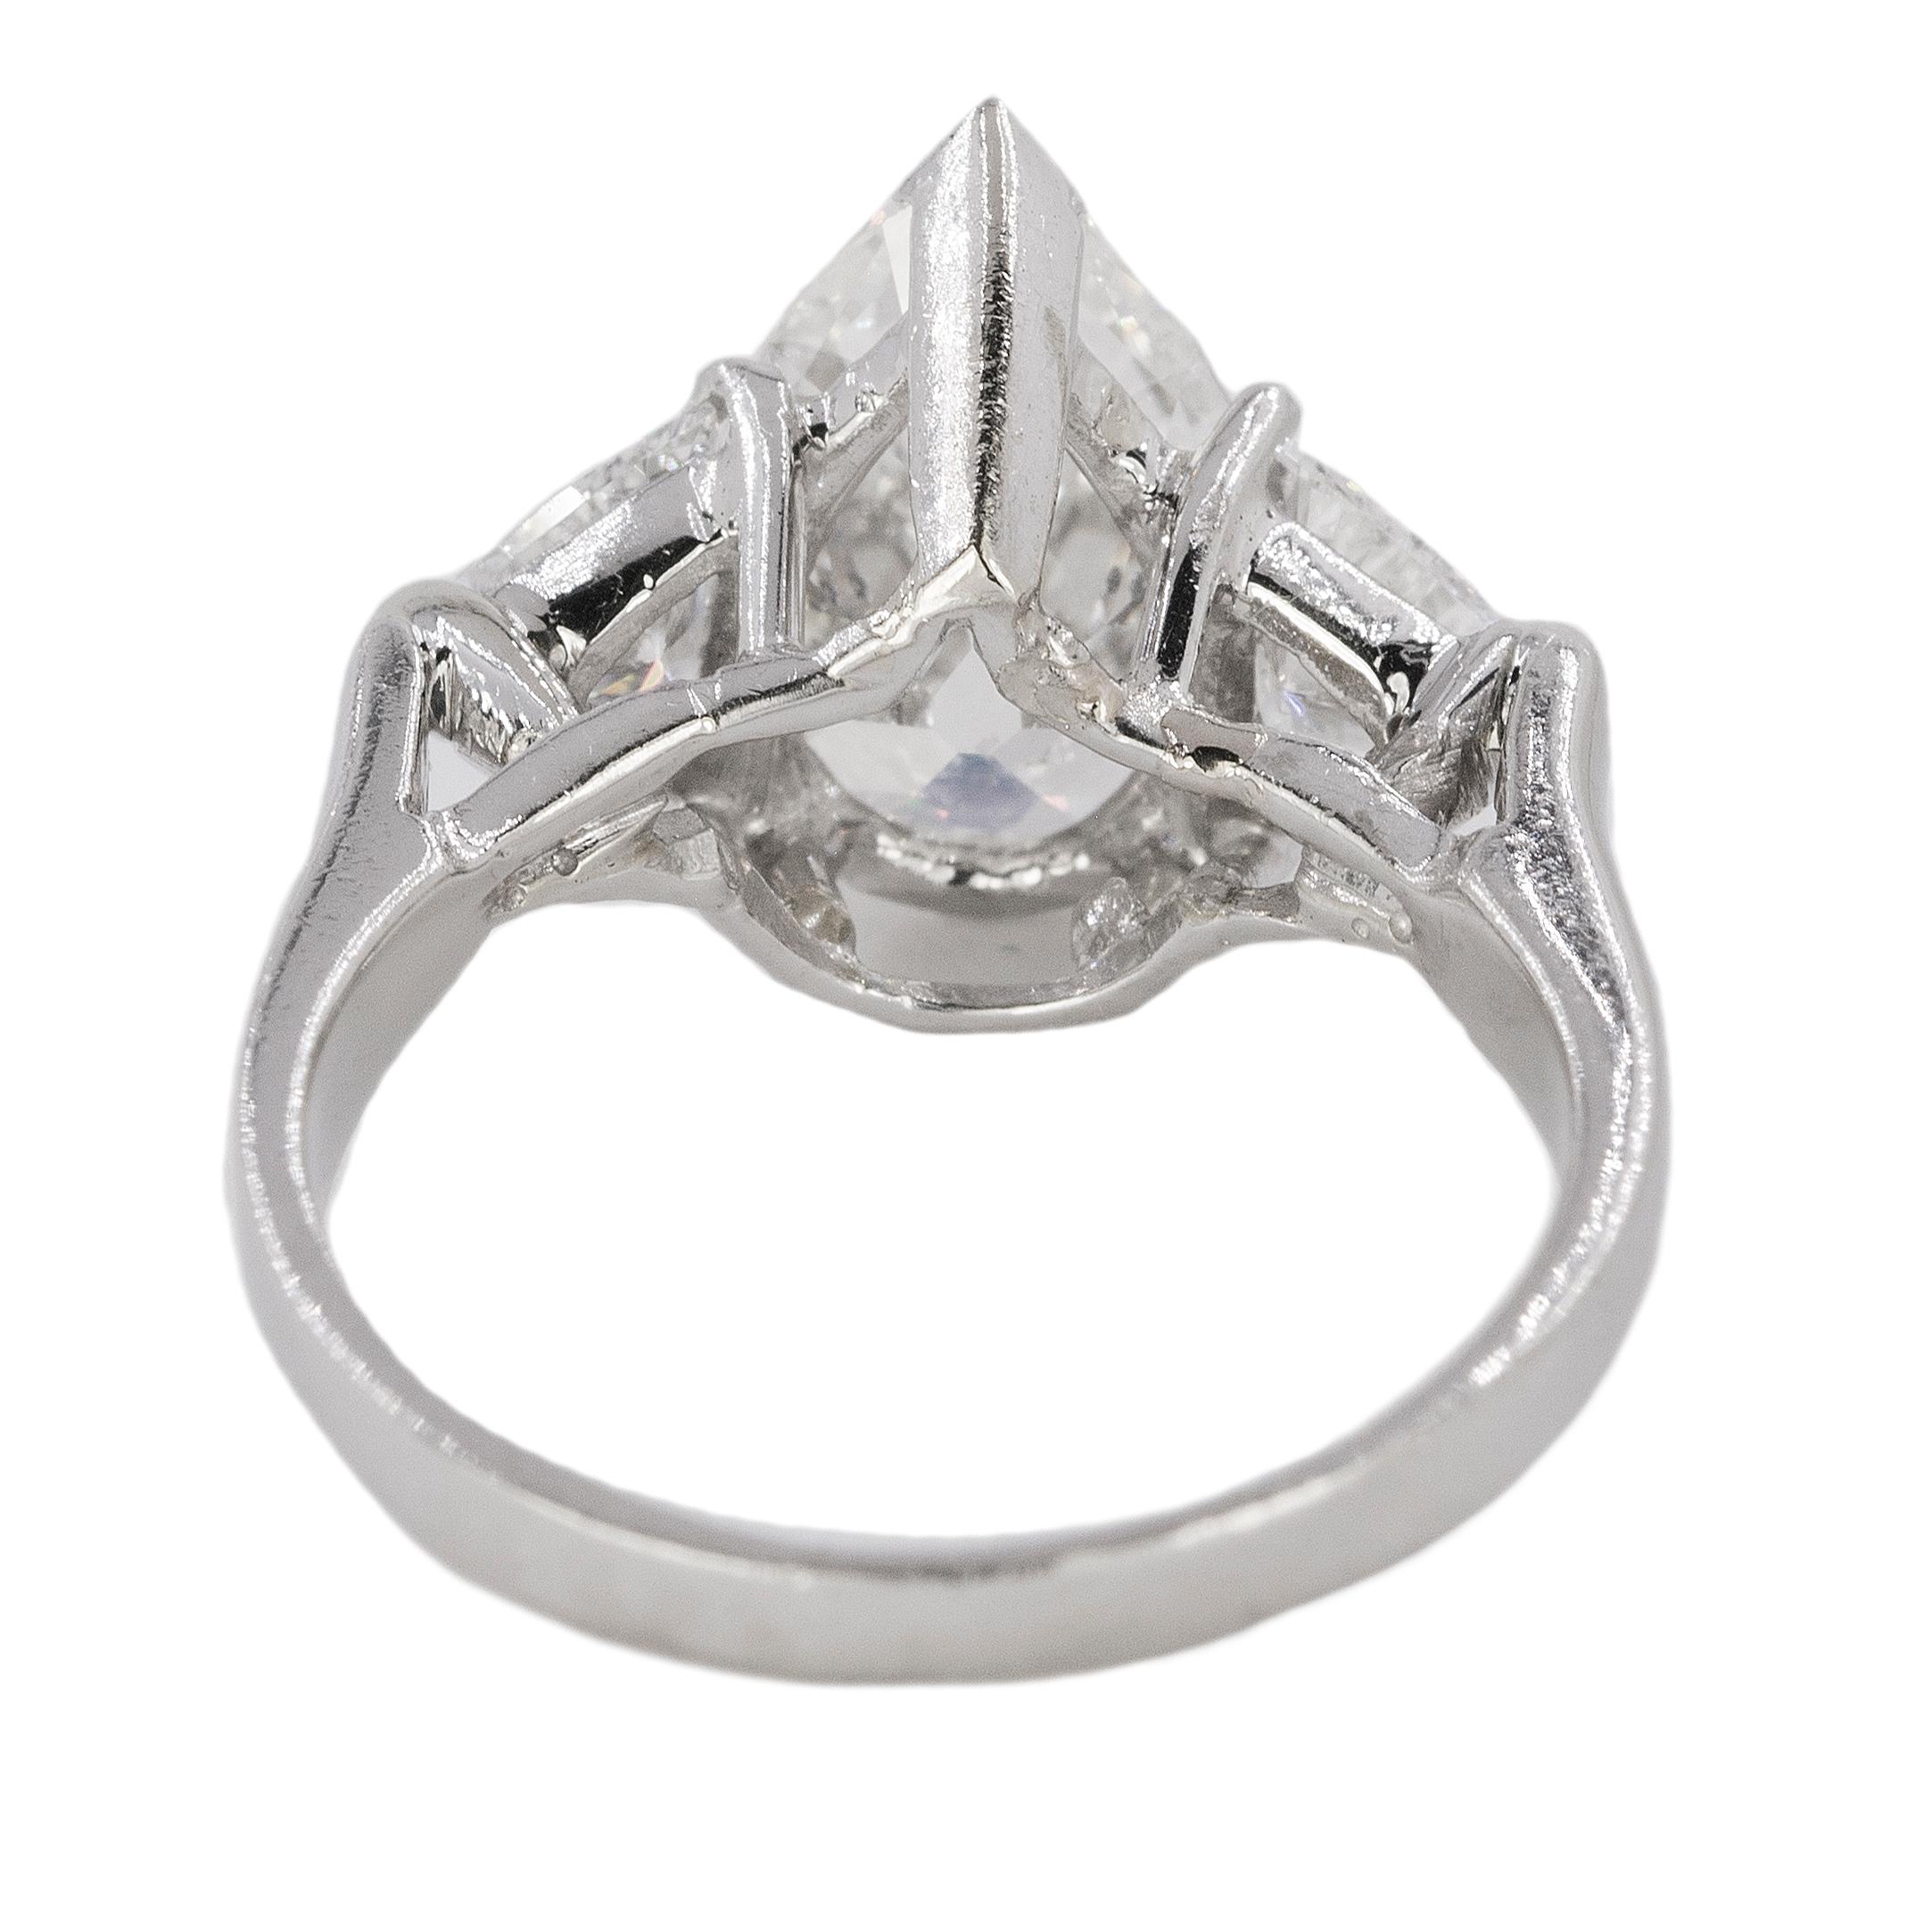 Women's or Men's Platinum Ring with 2.91 Carat Pear Shape